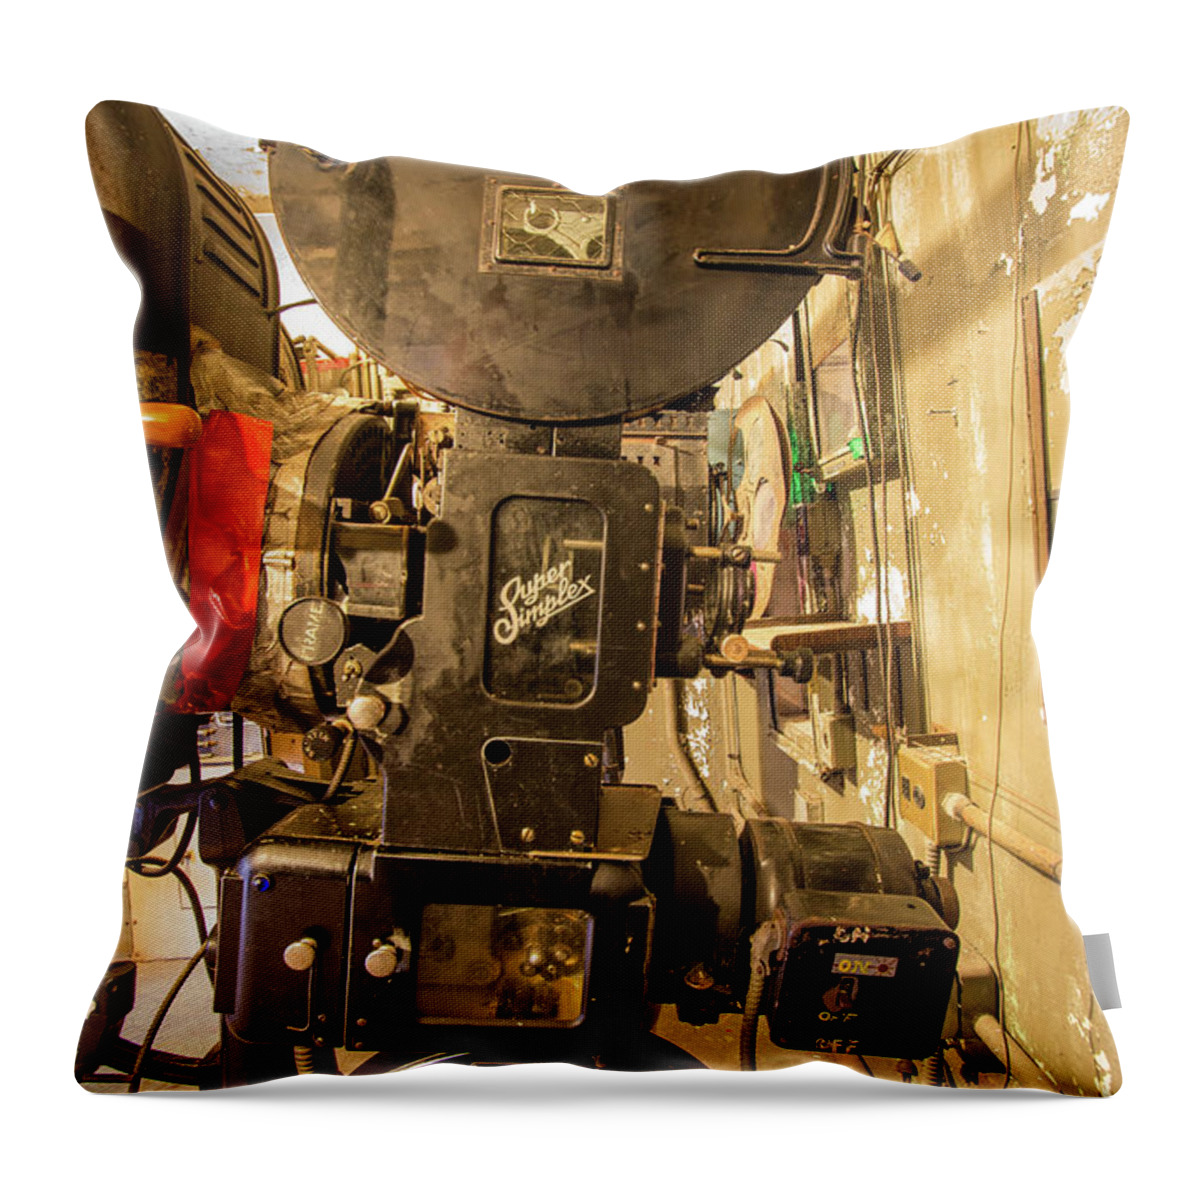 Landsdowne Throw Pillow featuring the photograph Lansdowne Theater projector by Michael Porchik